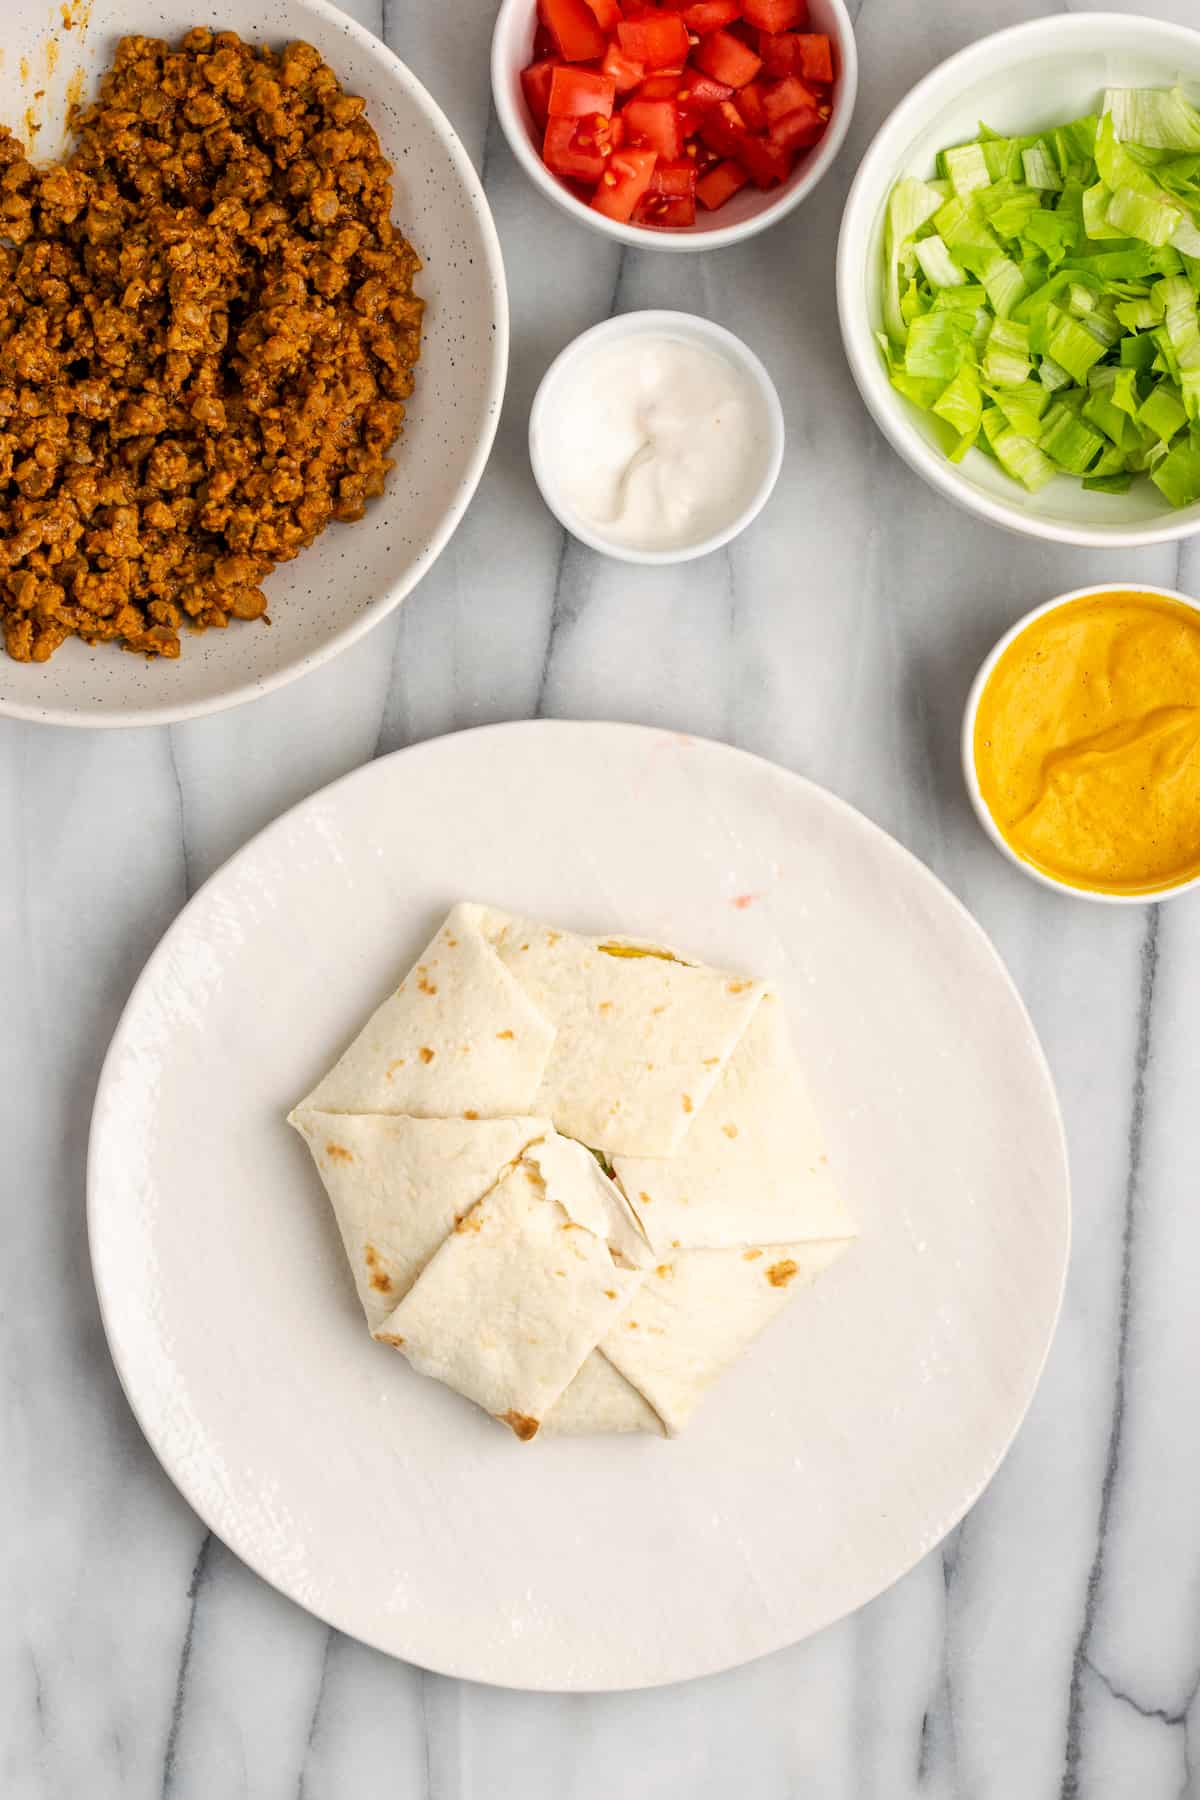 A plate with an untoasted crunchwrap on it, folded up, next to a bowl of vegan meat crumbles, a bowl of vegan sour cream, a bowl of vegan cheese sauce, a bowl of lettuce, and a bowl of tomatoes.